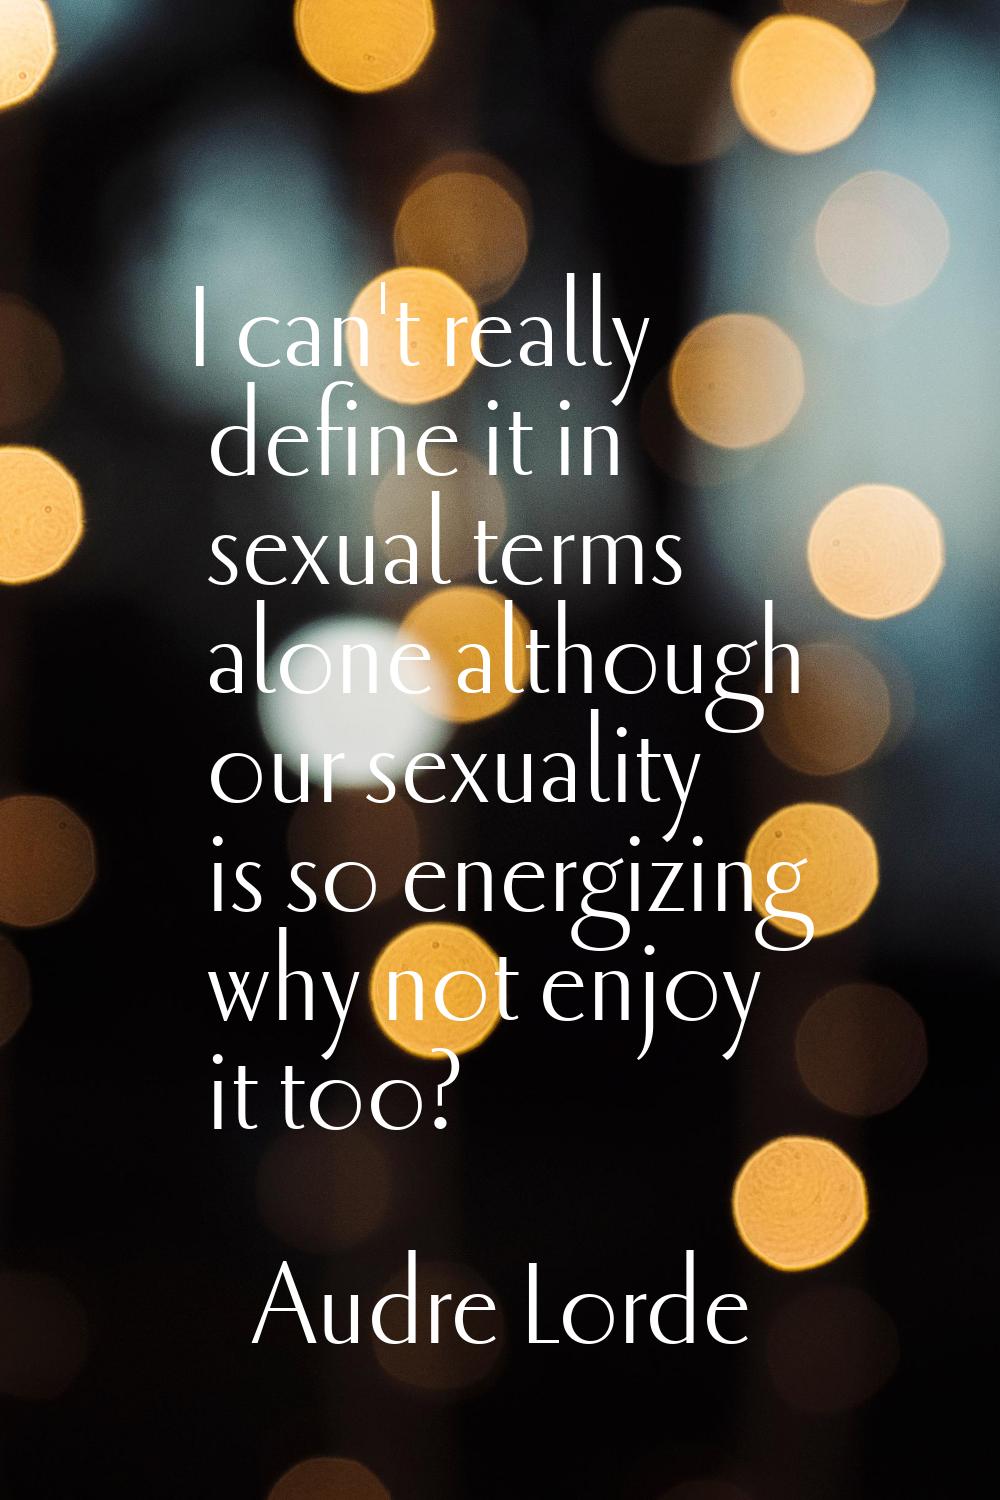 I can't really define it in sexual terms alone although our sexuality is so energizing why not enjo